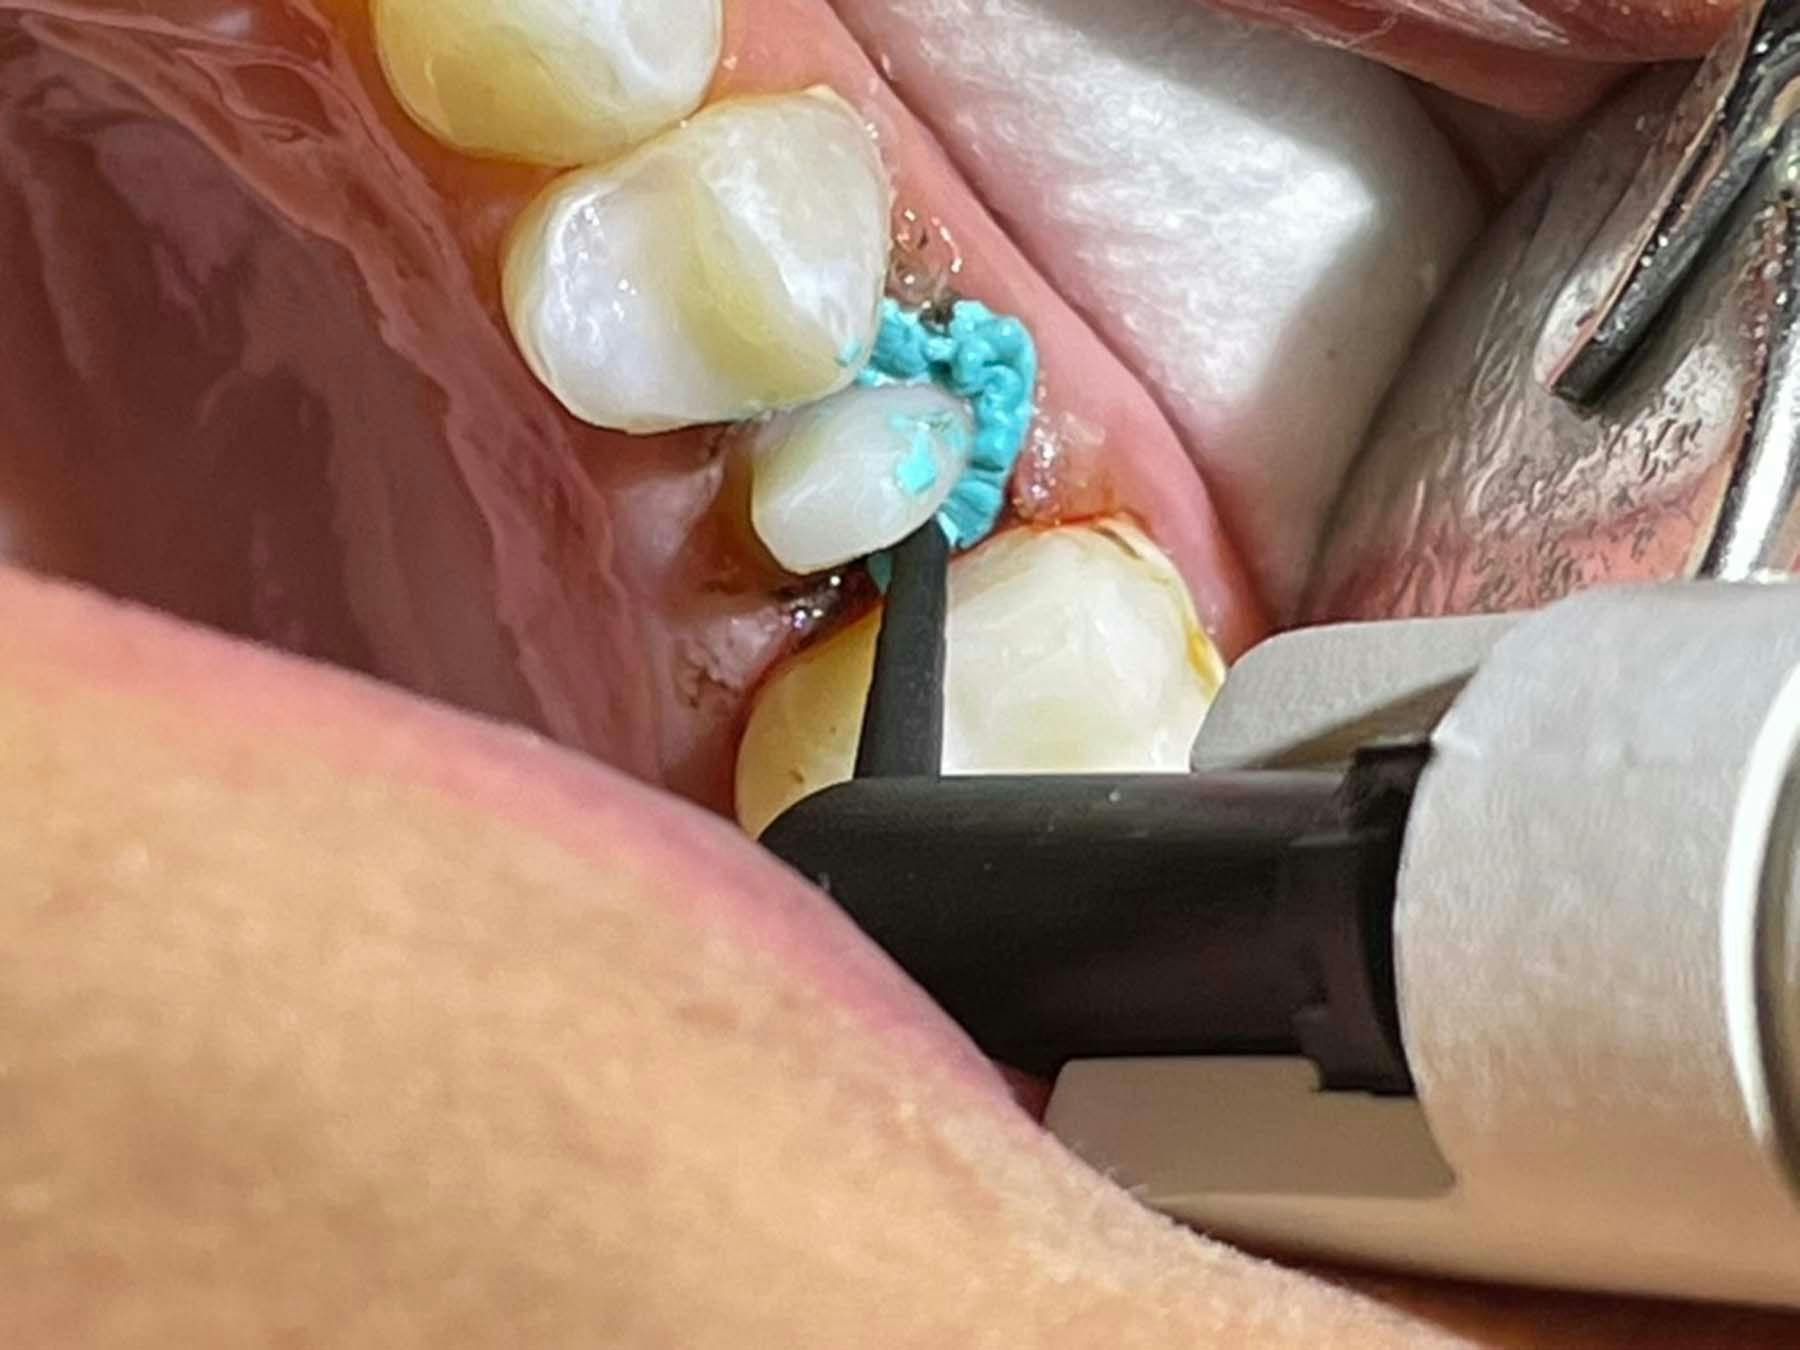 Why This Retraction Paste Is So Special | Image Credit: © Ankur Gupta, DDS